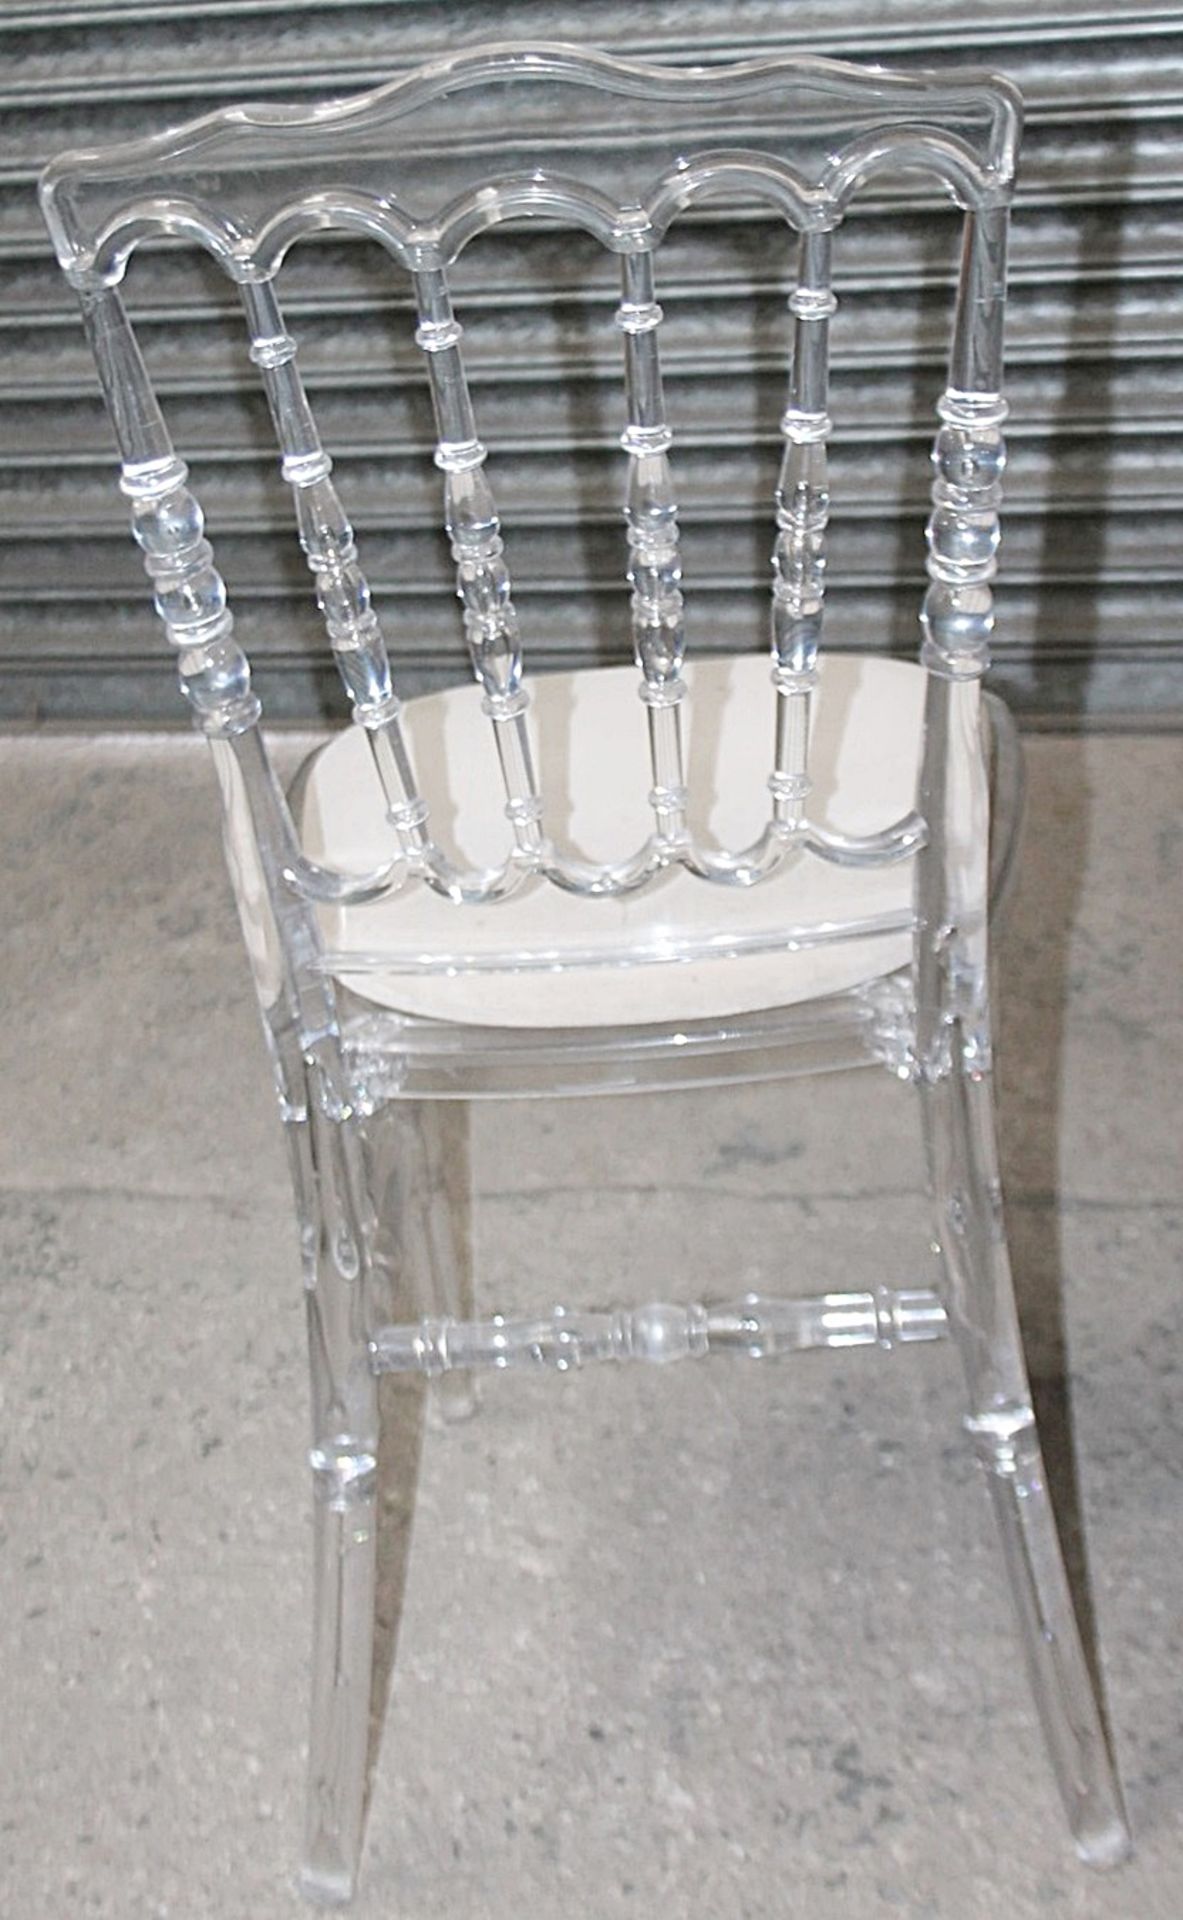 10 x Clear Acrylic Spindle Back Dining Chairs With Removable Seat Pads - Ref: HAS678A - CL011 / G-IT - Image 6 of 10